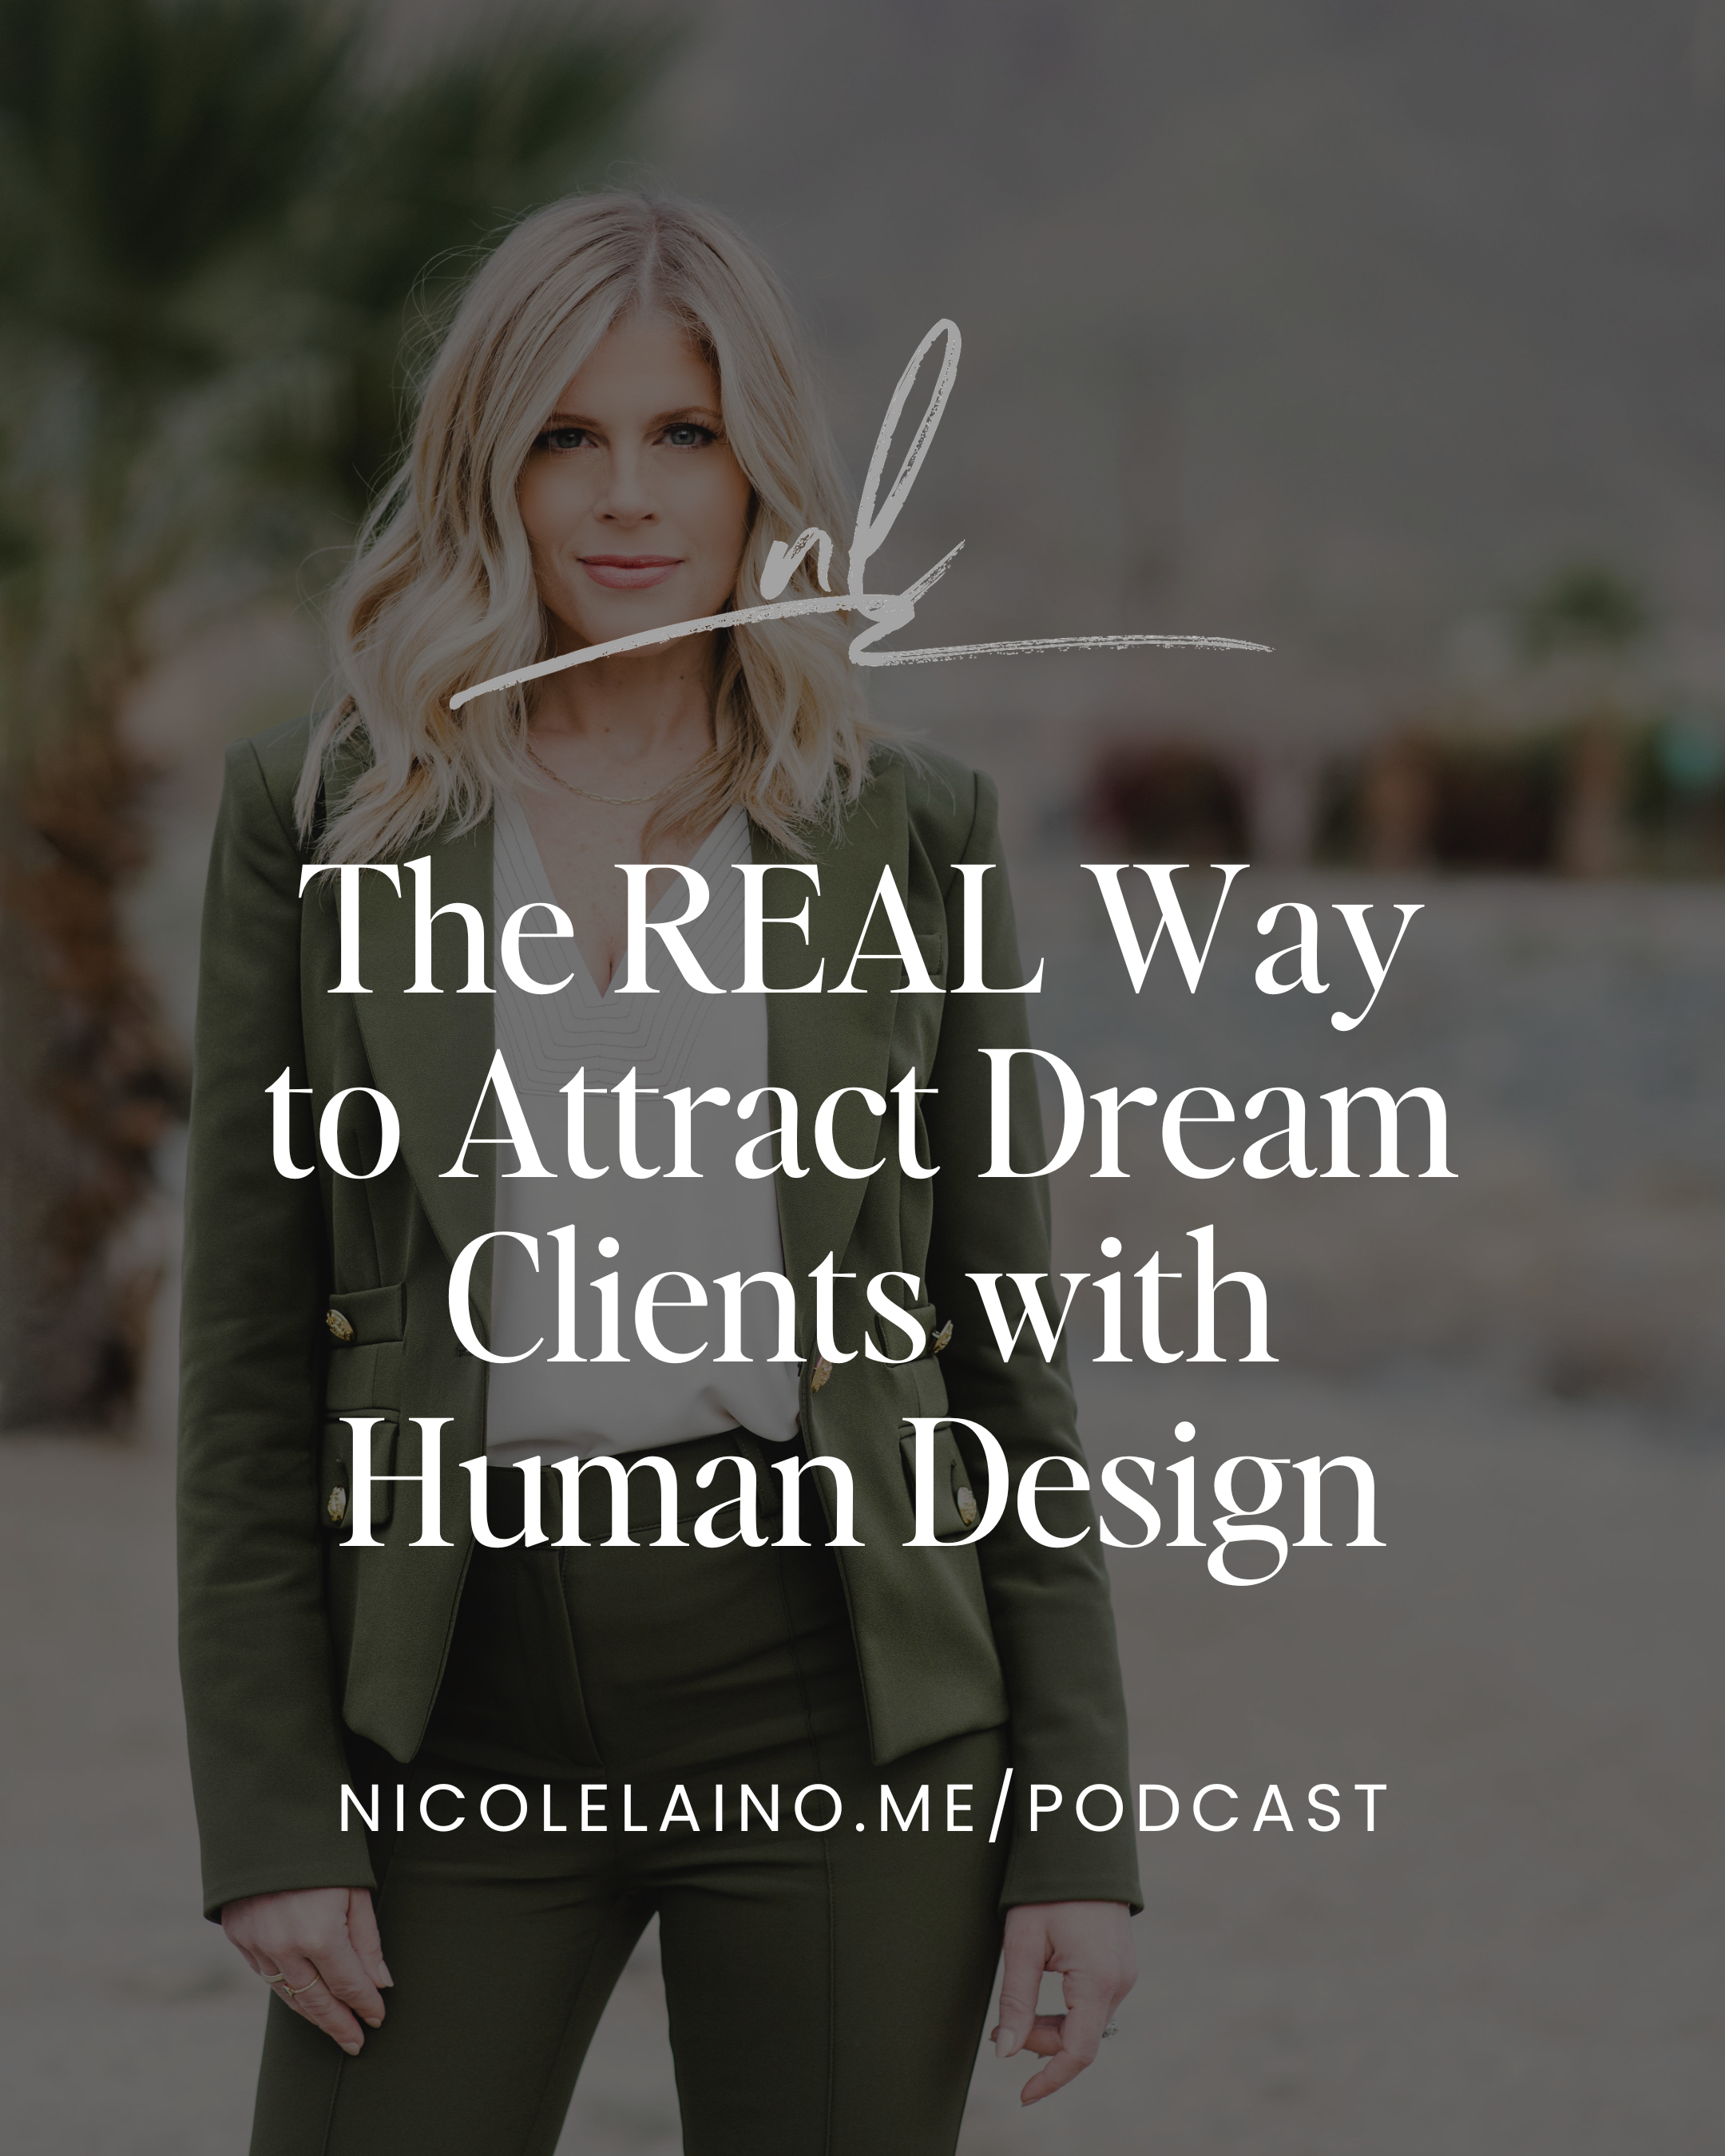 The REAL Way to Attract Dream Clients with Human Design